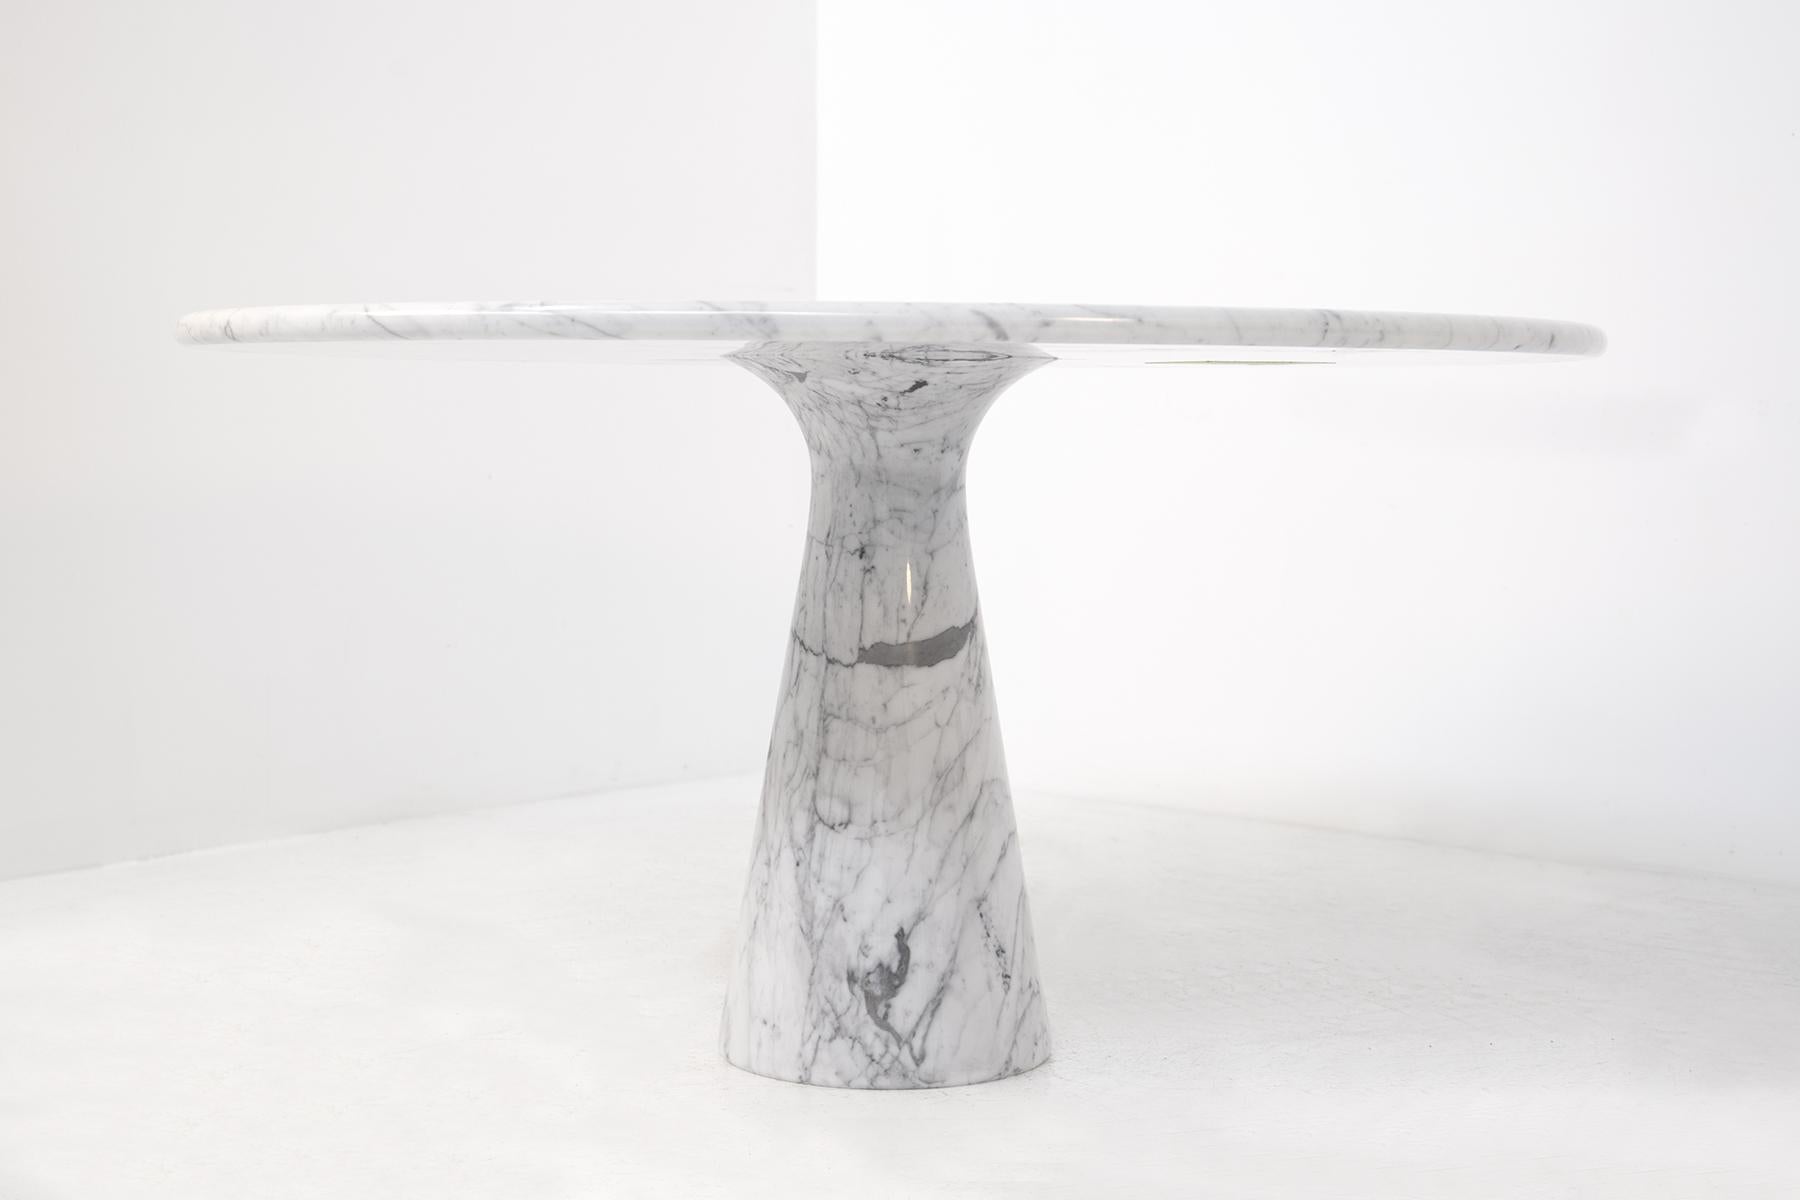 Elegant round two-piece Carrara marble dining table by Angelo Mangiarotti. Centre table.
Model M1 T70 1969 and manufactured by Skipper in Italy. Lovely strong veining throughout and amazing marble for the plateau.
No chips, cracks or restorations.